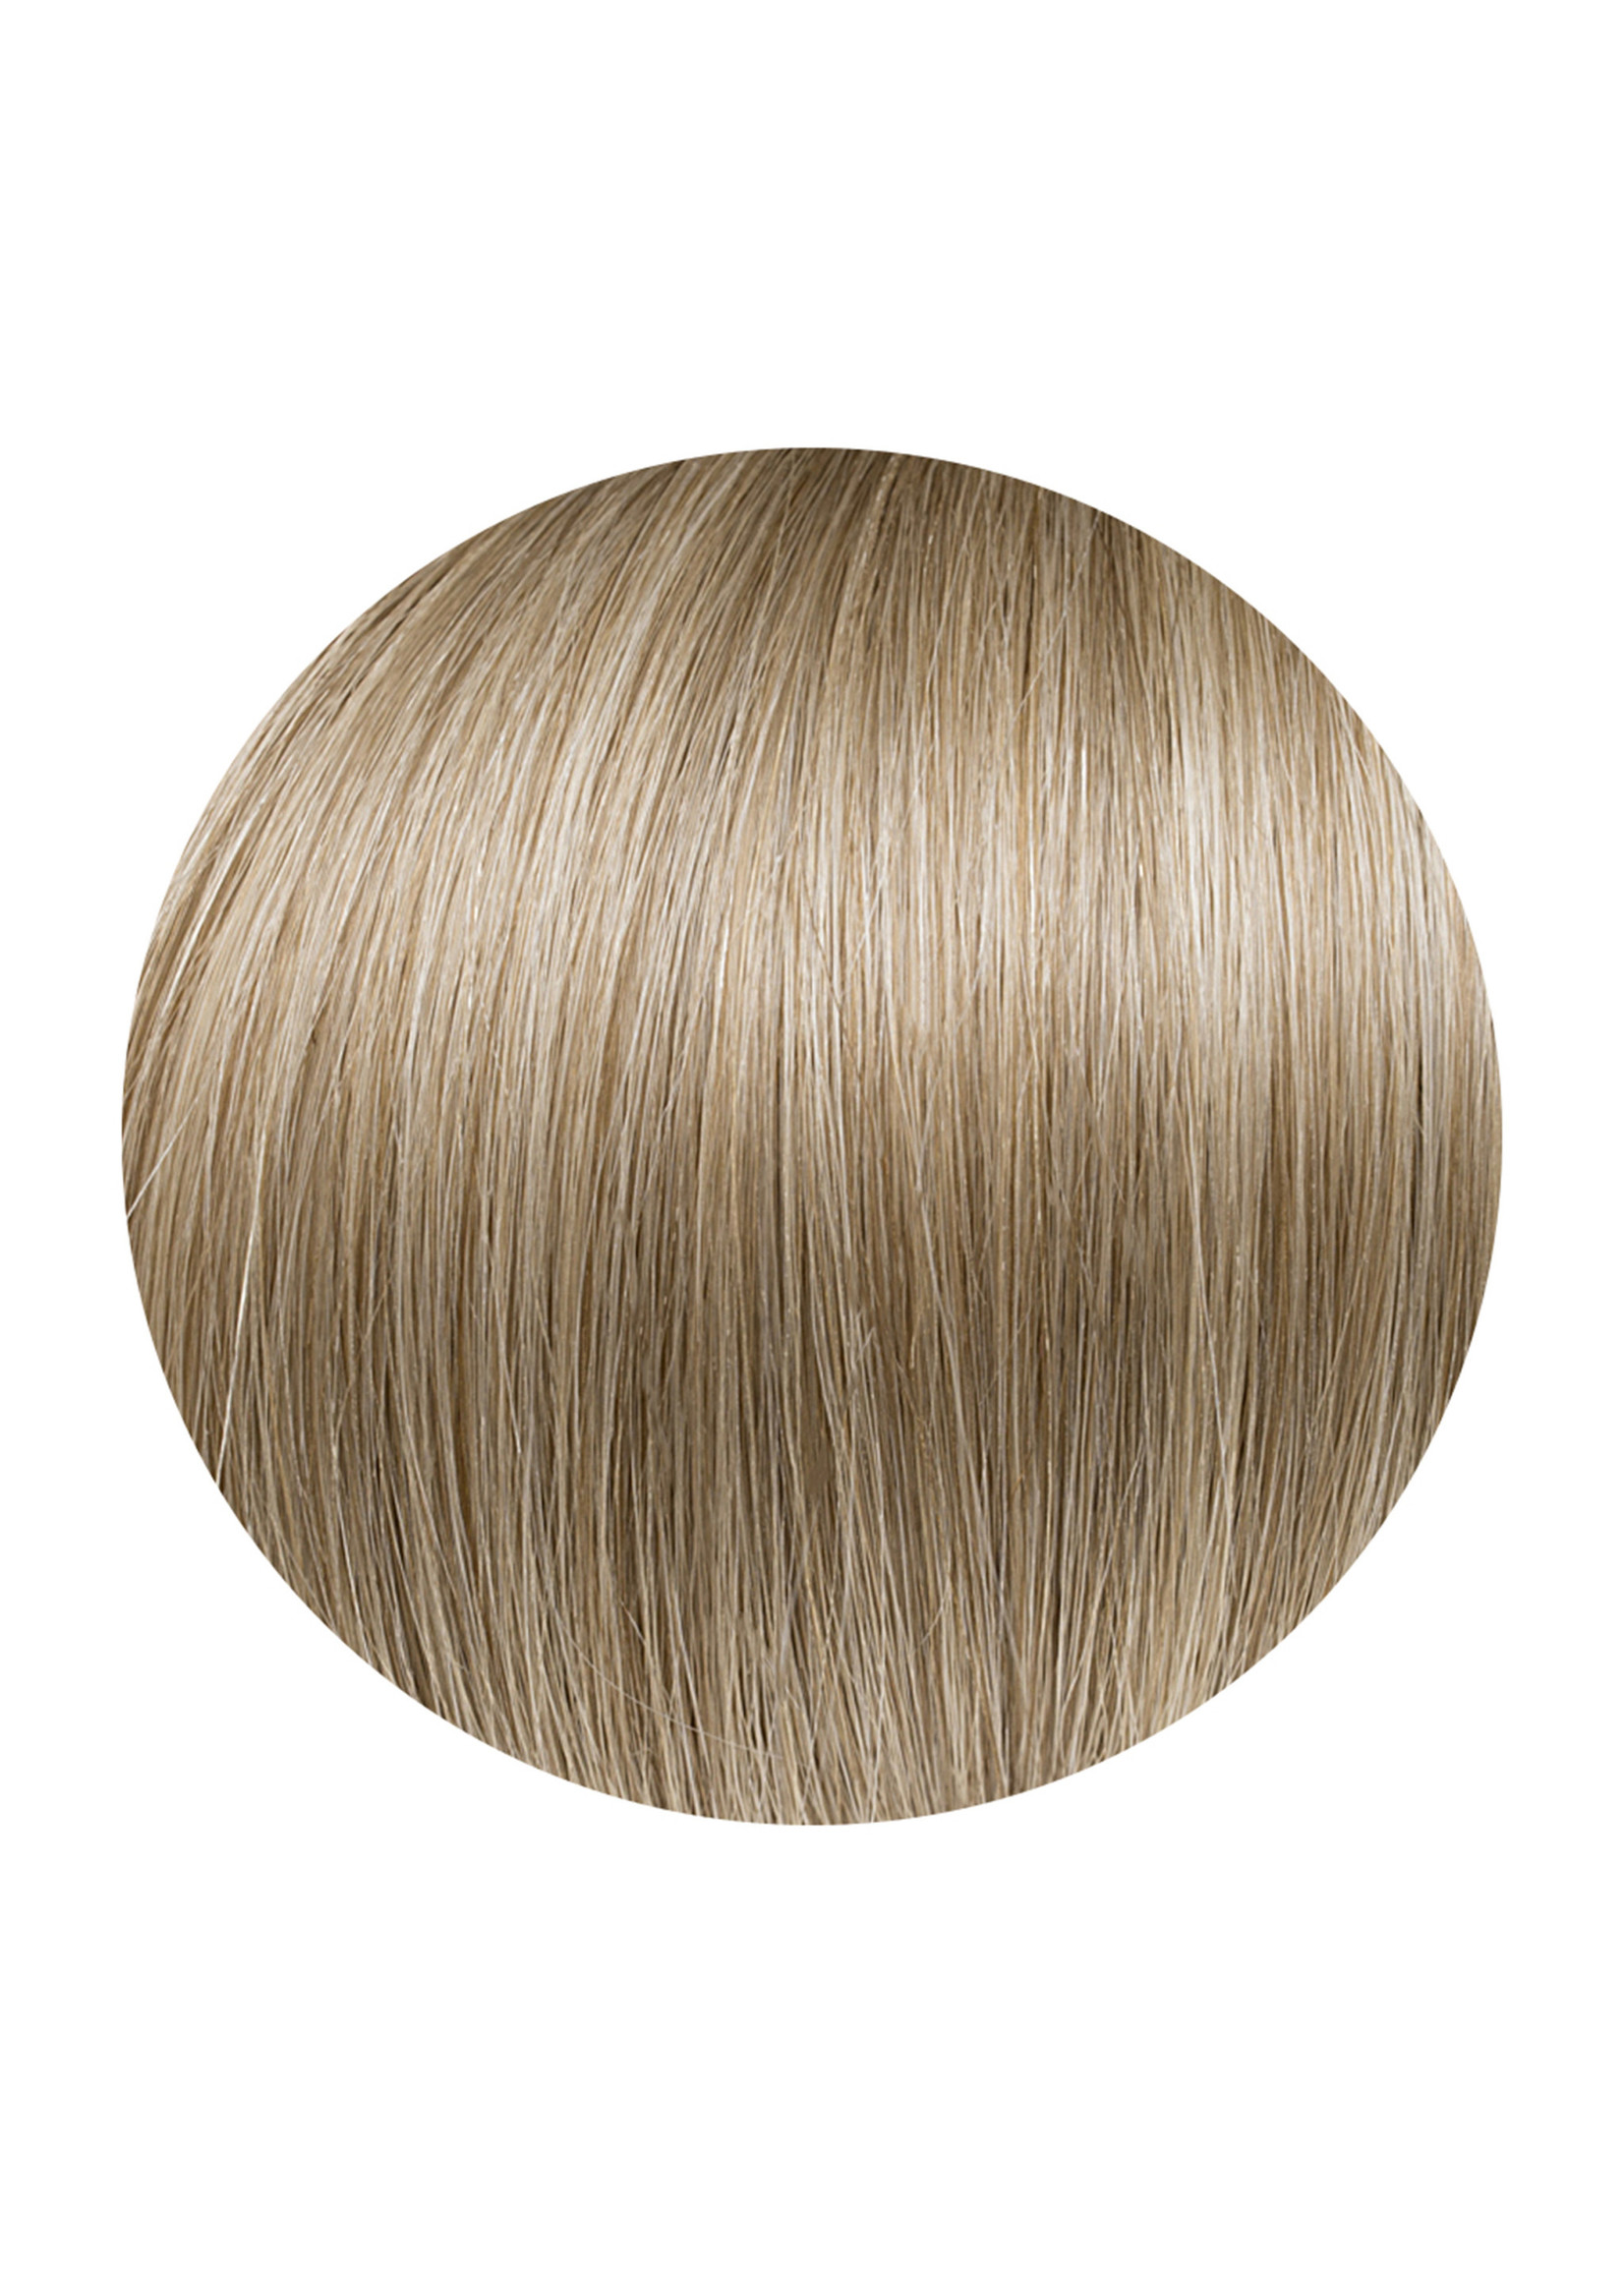 Seamless1 Seamless1 Fibre Clip-in Hair Extensions 22 Inches - CoffeenCream Balayage